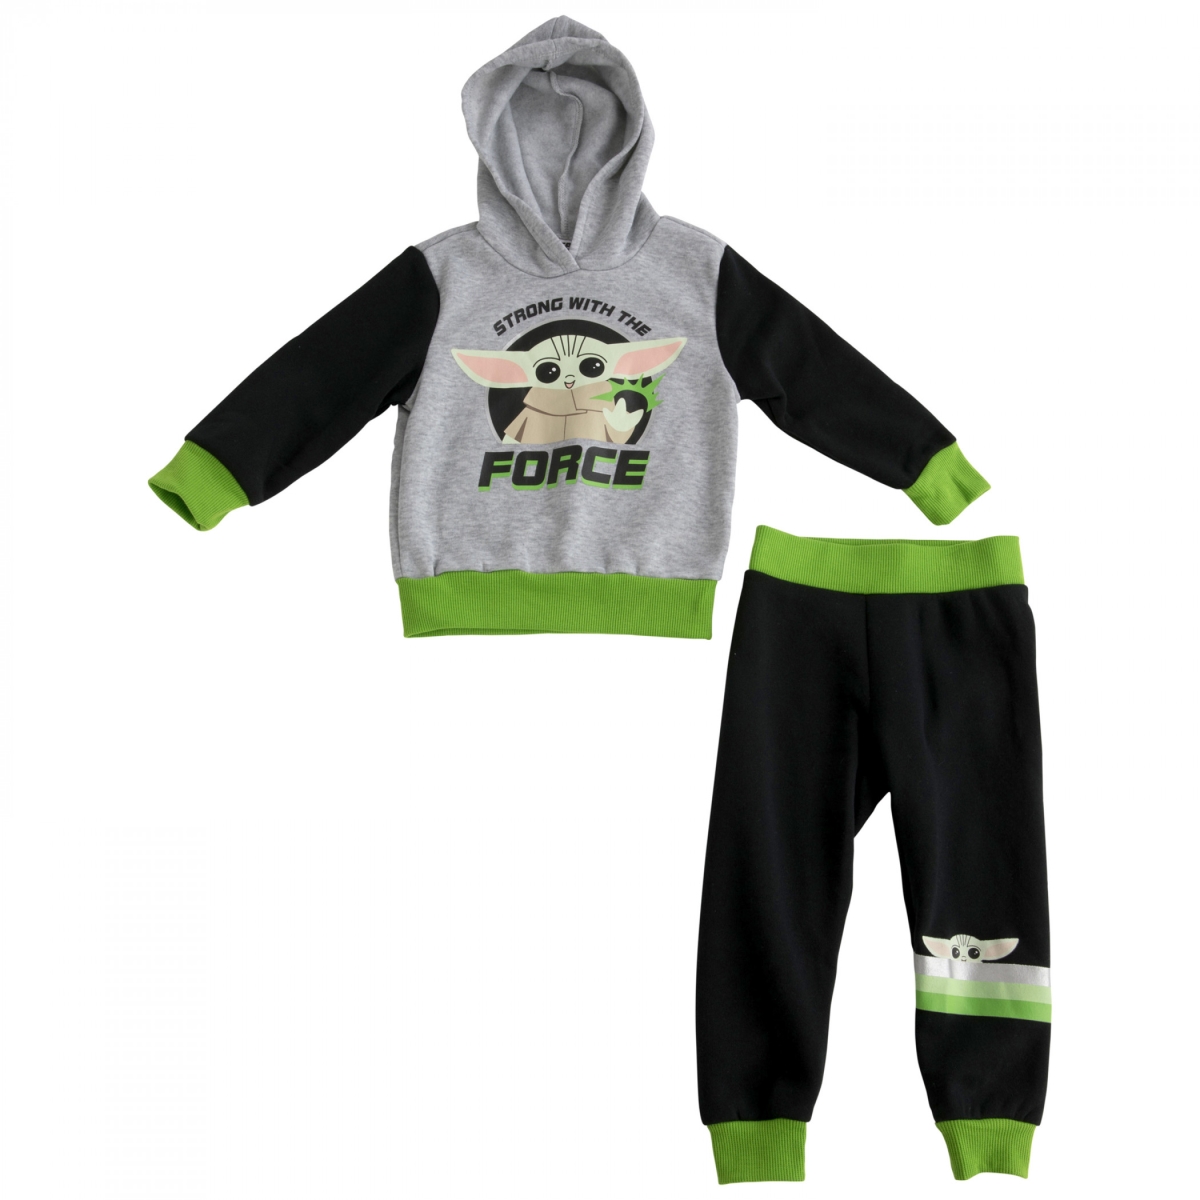 Picture of Star Wars 850064-toddler2t Star Wars Grogu Strong with the Force Infant Fleece Jacket Set - Black & Grey - Toddler 2T - 2 Piece